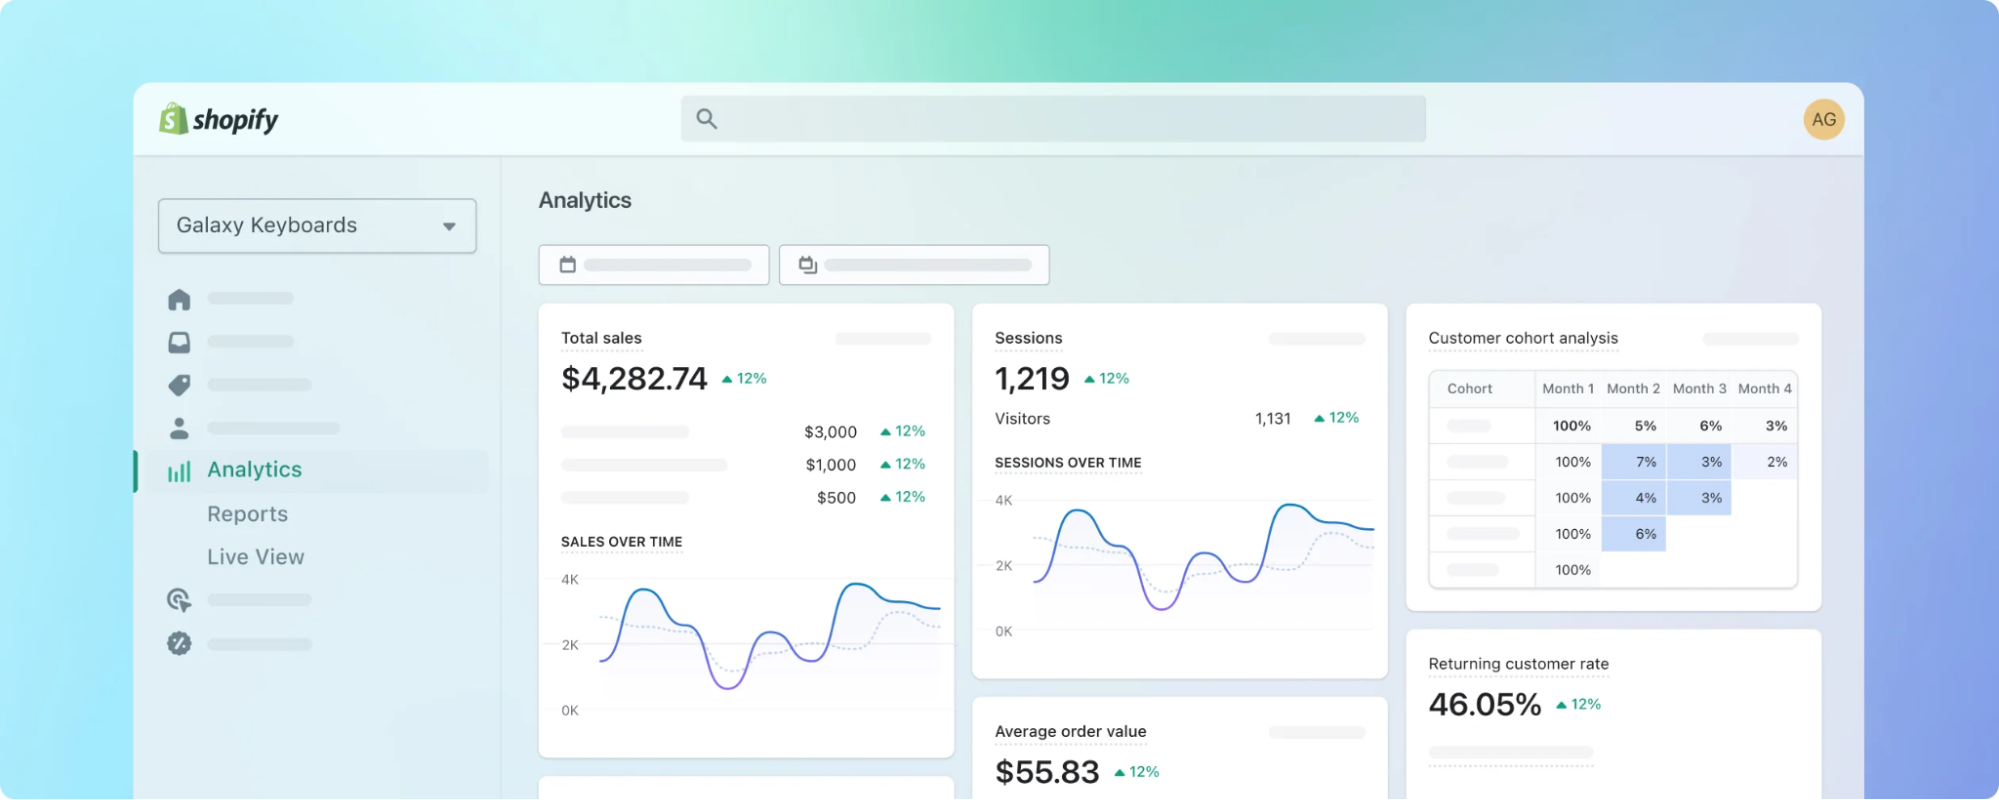 Image of Shopify merchant dashboard with sales, sessions, and other metrics